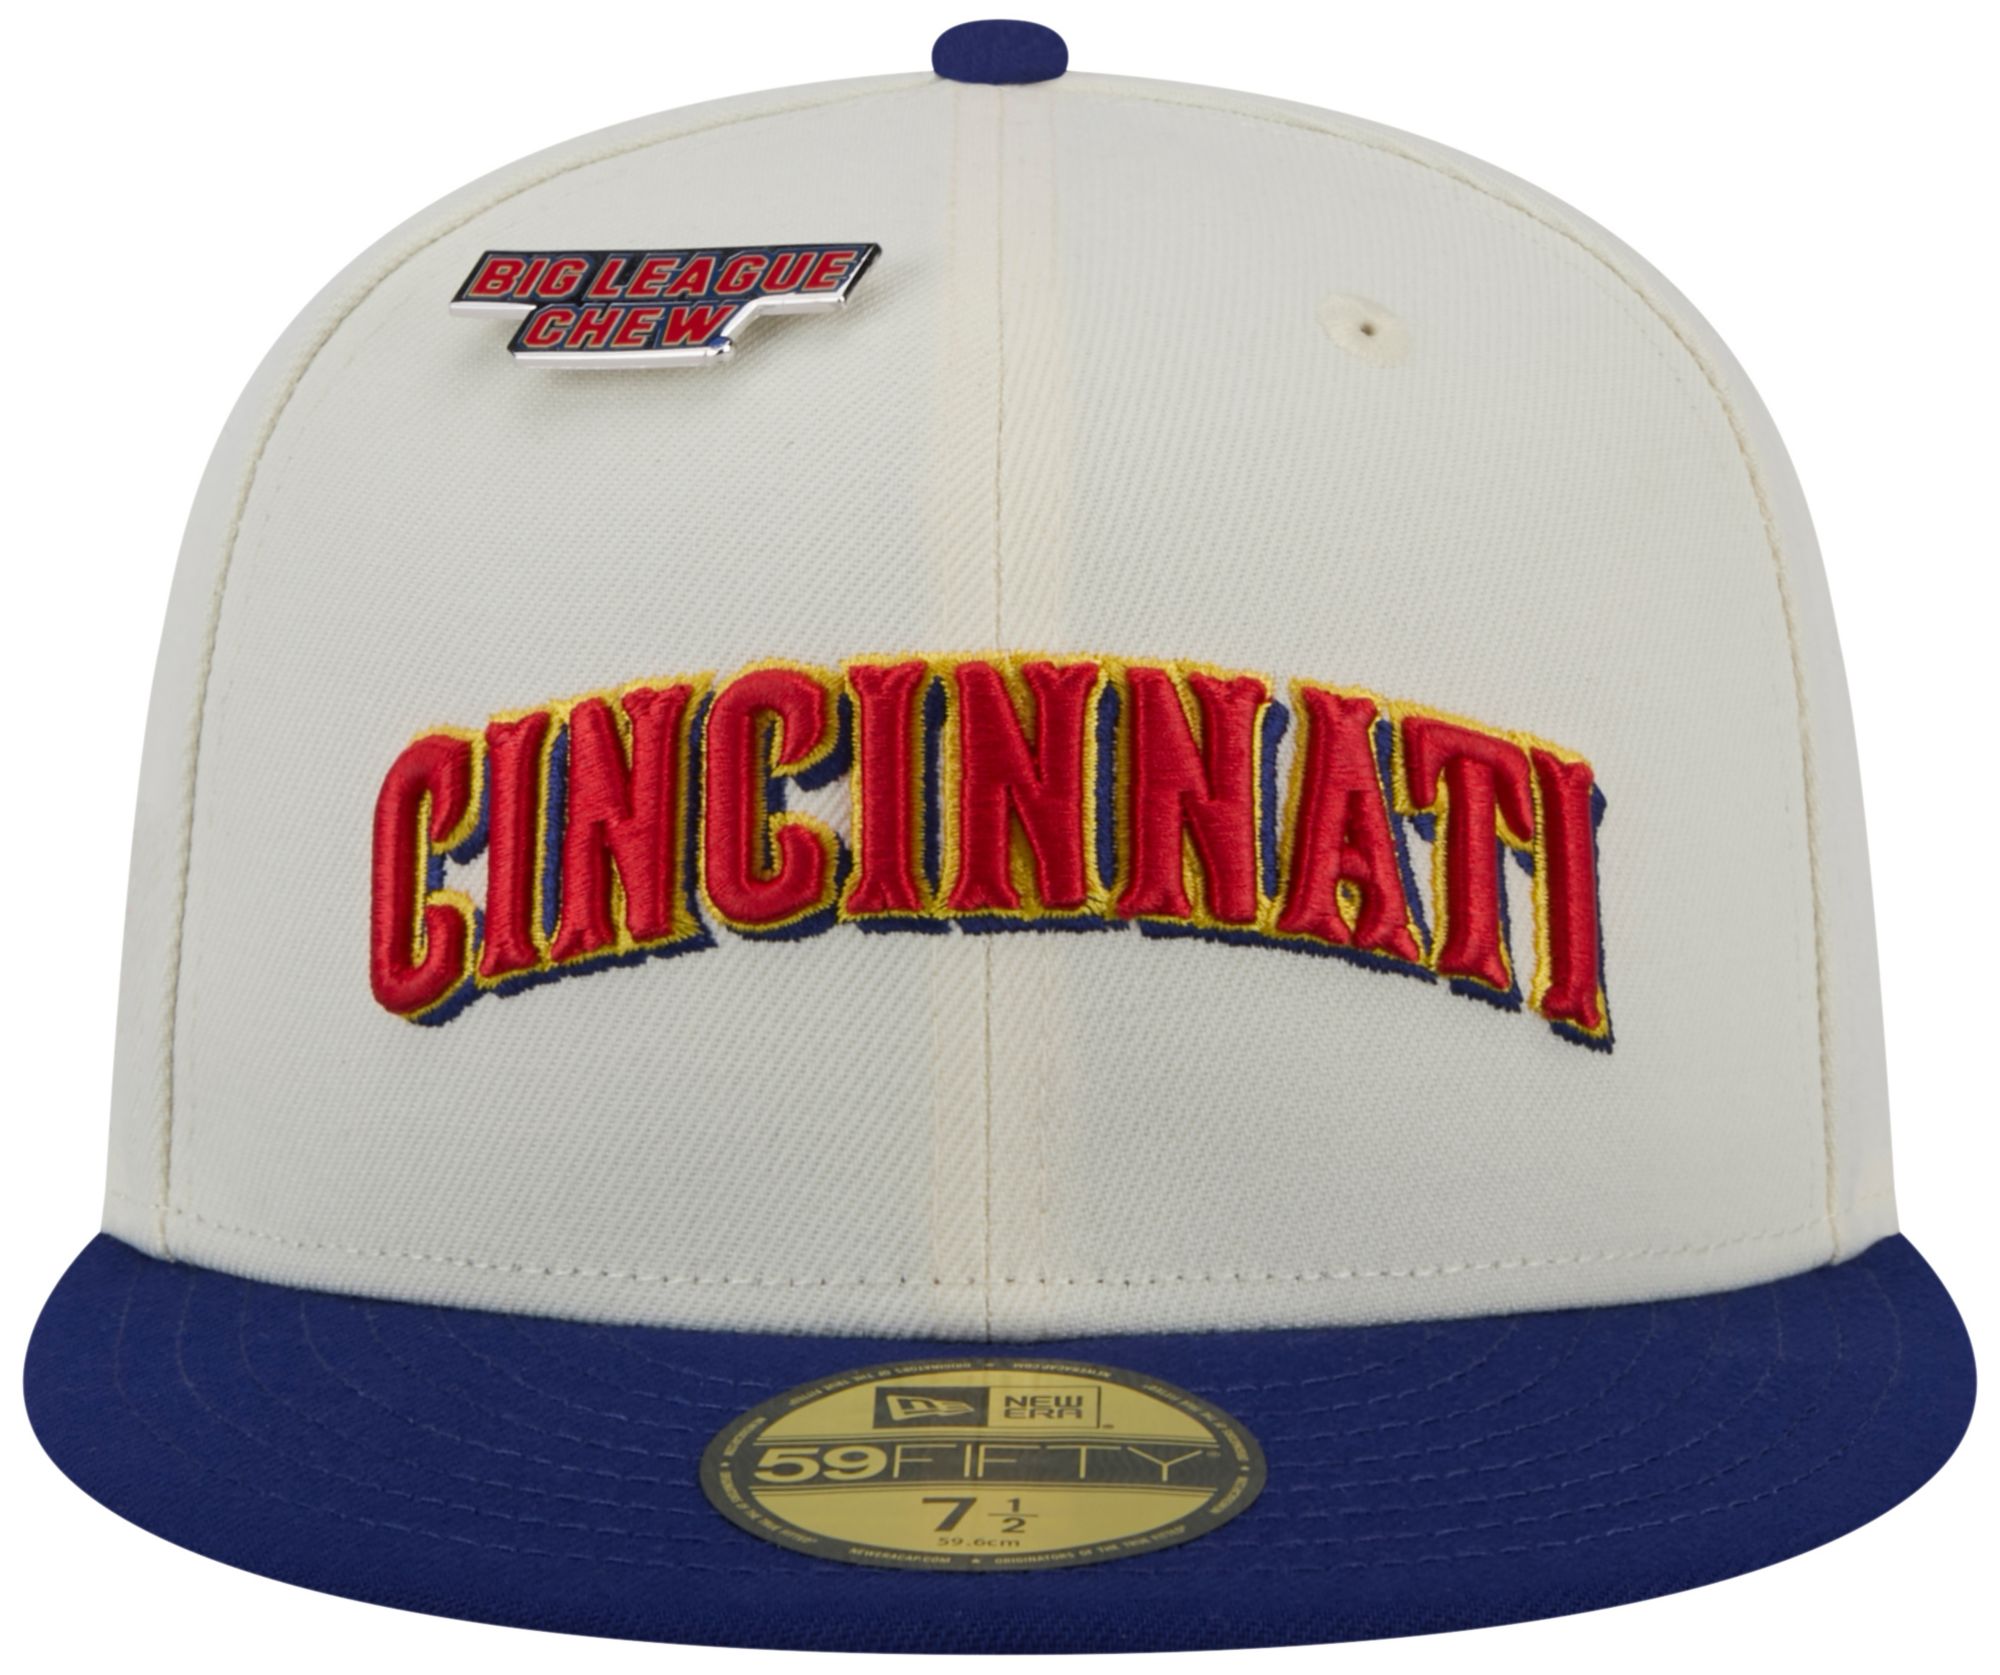 New Era Adult Cincinnati Reds Big League Chew White 59Fifty Fitted Hat |  DICK'S Sporting Goods